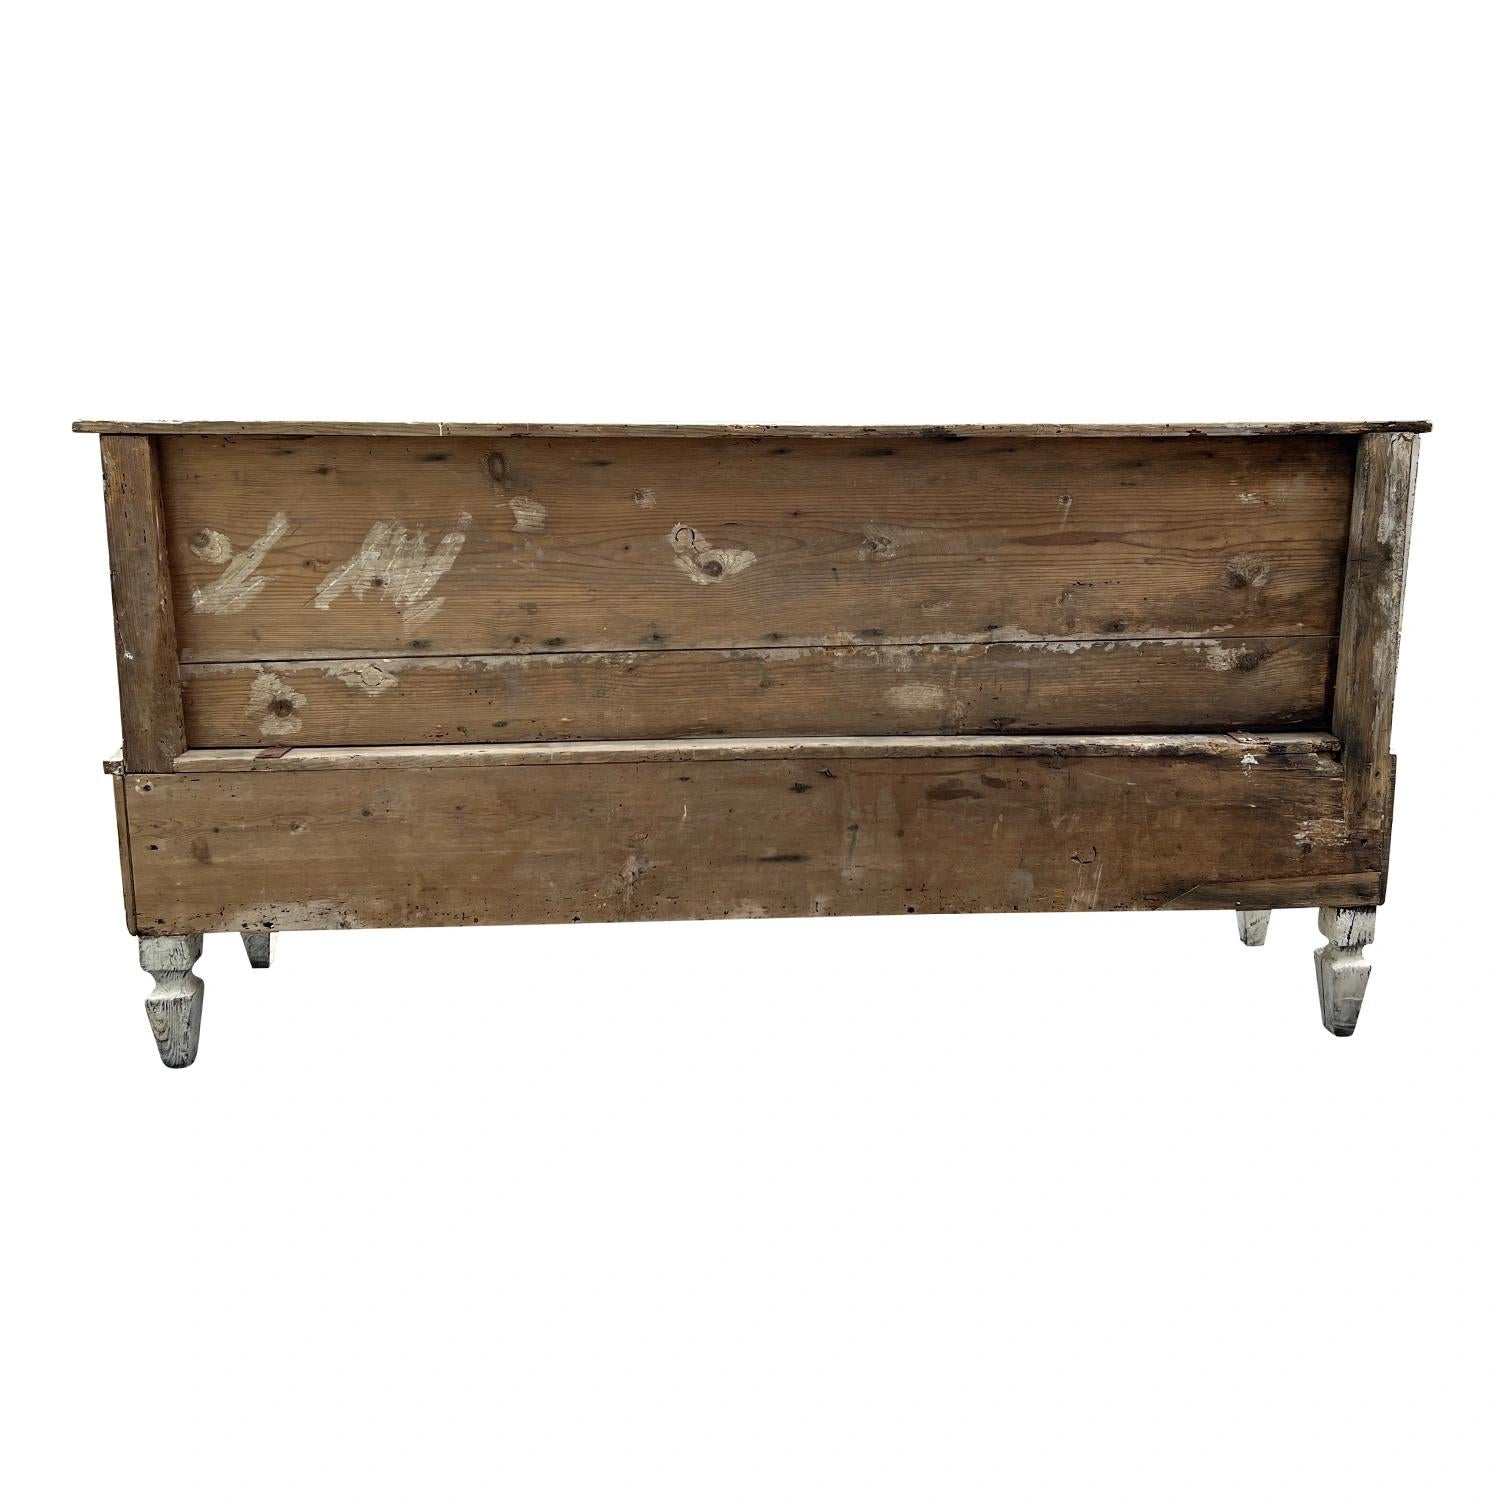 Metal 18th Century Italian Arte Povera Pinewood Bench, Antique Seating Furniture For Sale